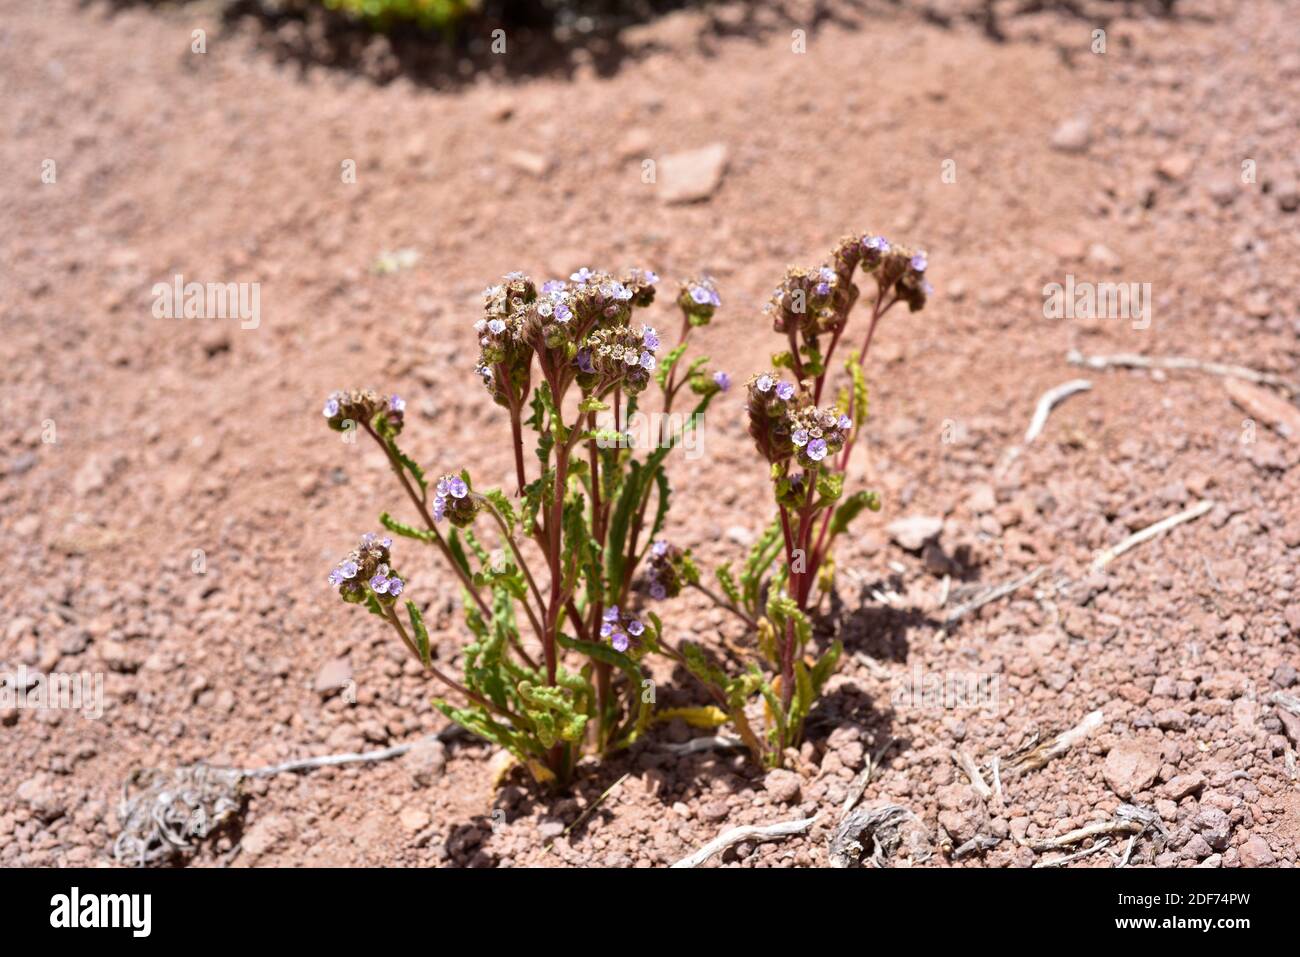 Phacelia setigera is an herbaceous plant native to north Chile and Argentina. This photo was taken in Puna grassland, Chile. Stock Photo